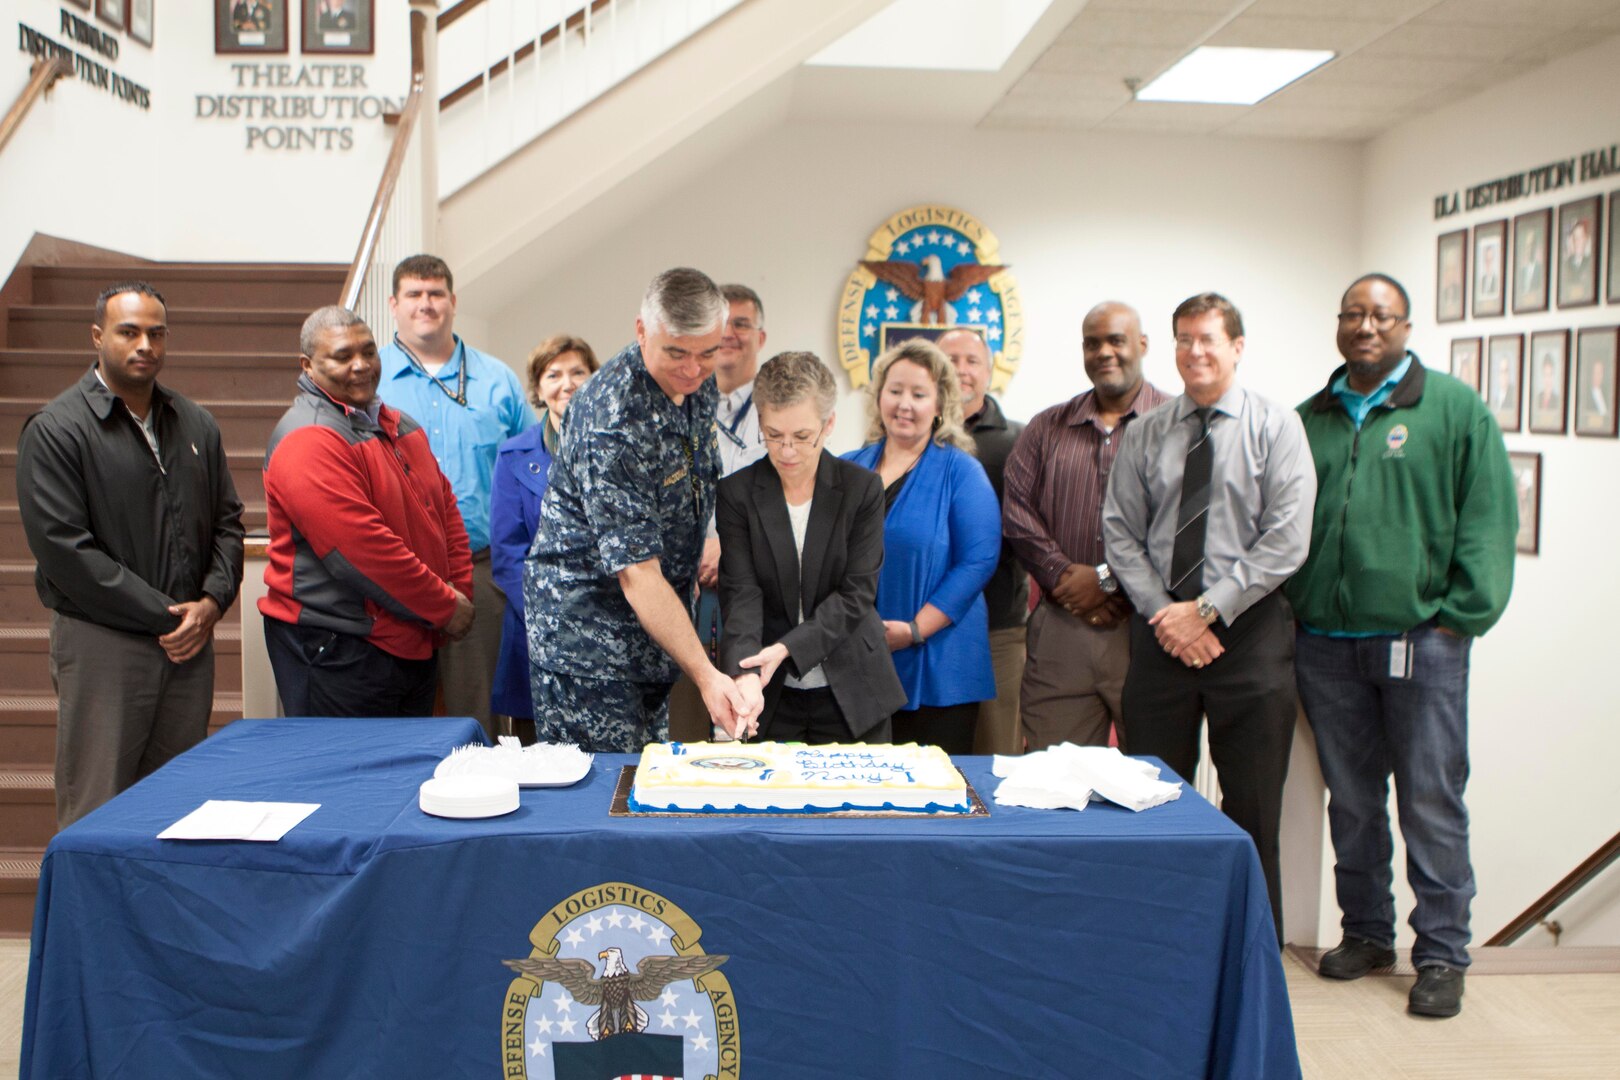 DLA Distribution deputy commander Twila Gonzales, Senior Executive Service, center, cuts a cake honoring the Navy’s 241st birthday alongside DLA Distribution’s active, reserve and retired Navy sailors.  